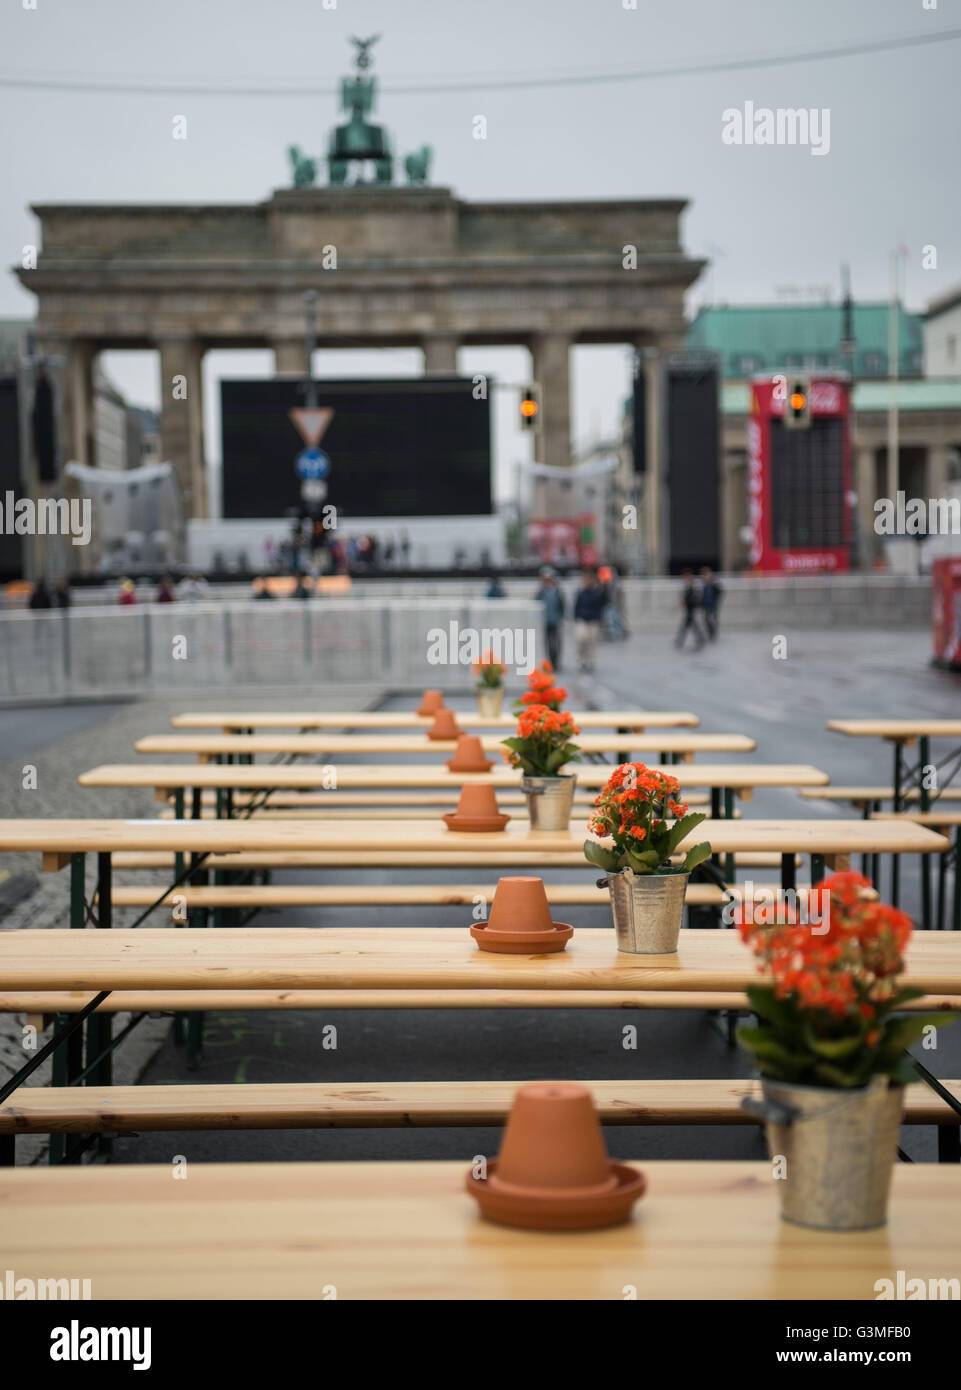 Berlin, Germany. 13th June, 2016. Empty tables are seen at the so called 'Fanmeile' (Supporters mile), where the public screenings of UEFA European Championship matches take place, in Berlin, Germany, 13 June 2016. Photo: Sophia Kembowski/dpa/Alamy Live News Stock Photo